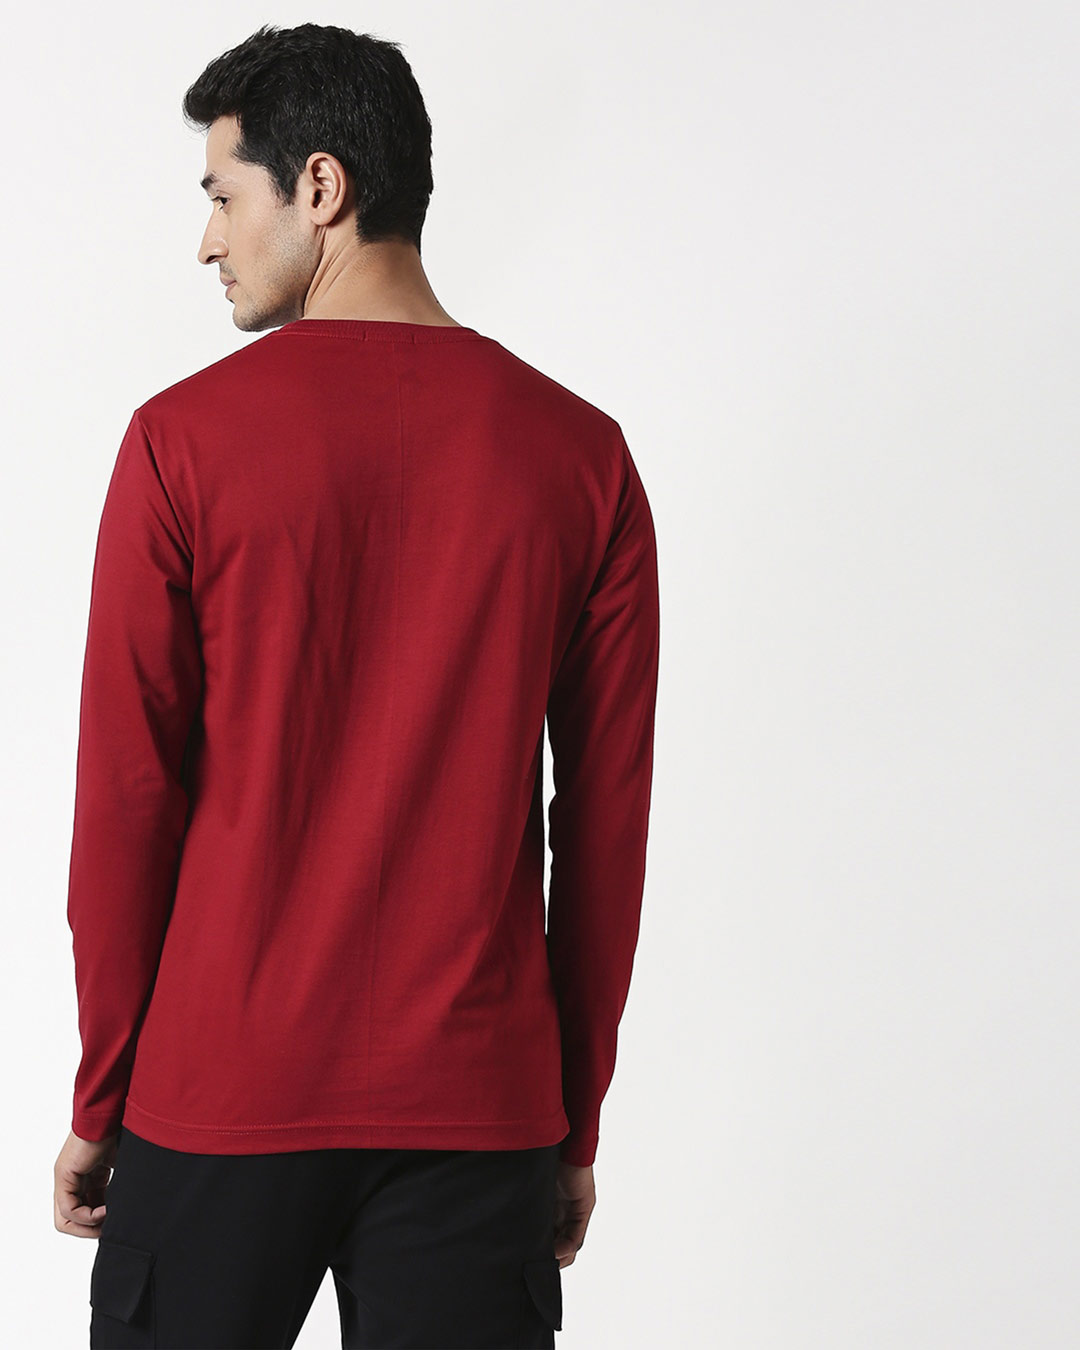 Shop Somewhere on Earth Full Sleeve T-Shirt Cherry Red-Back